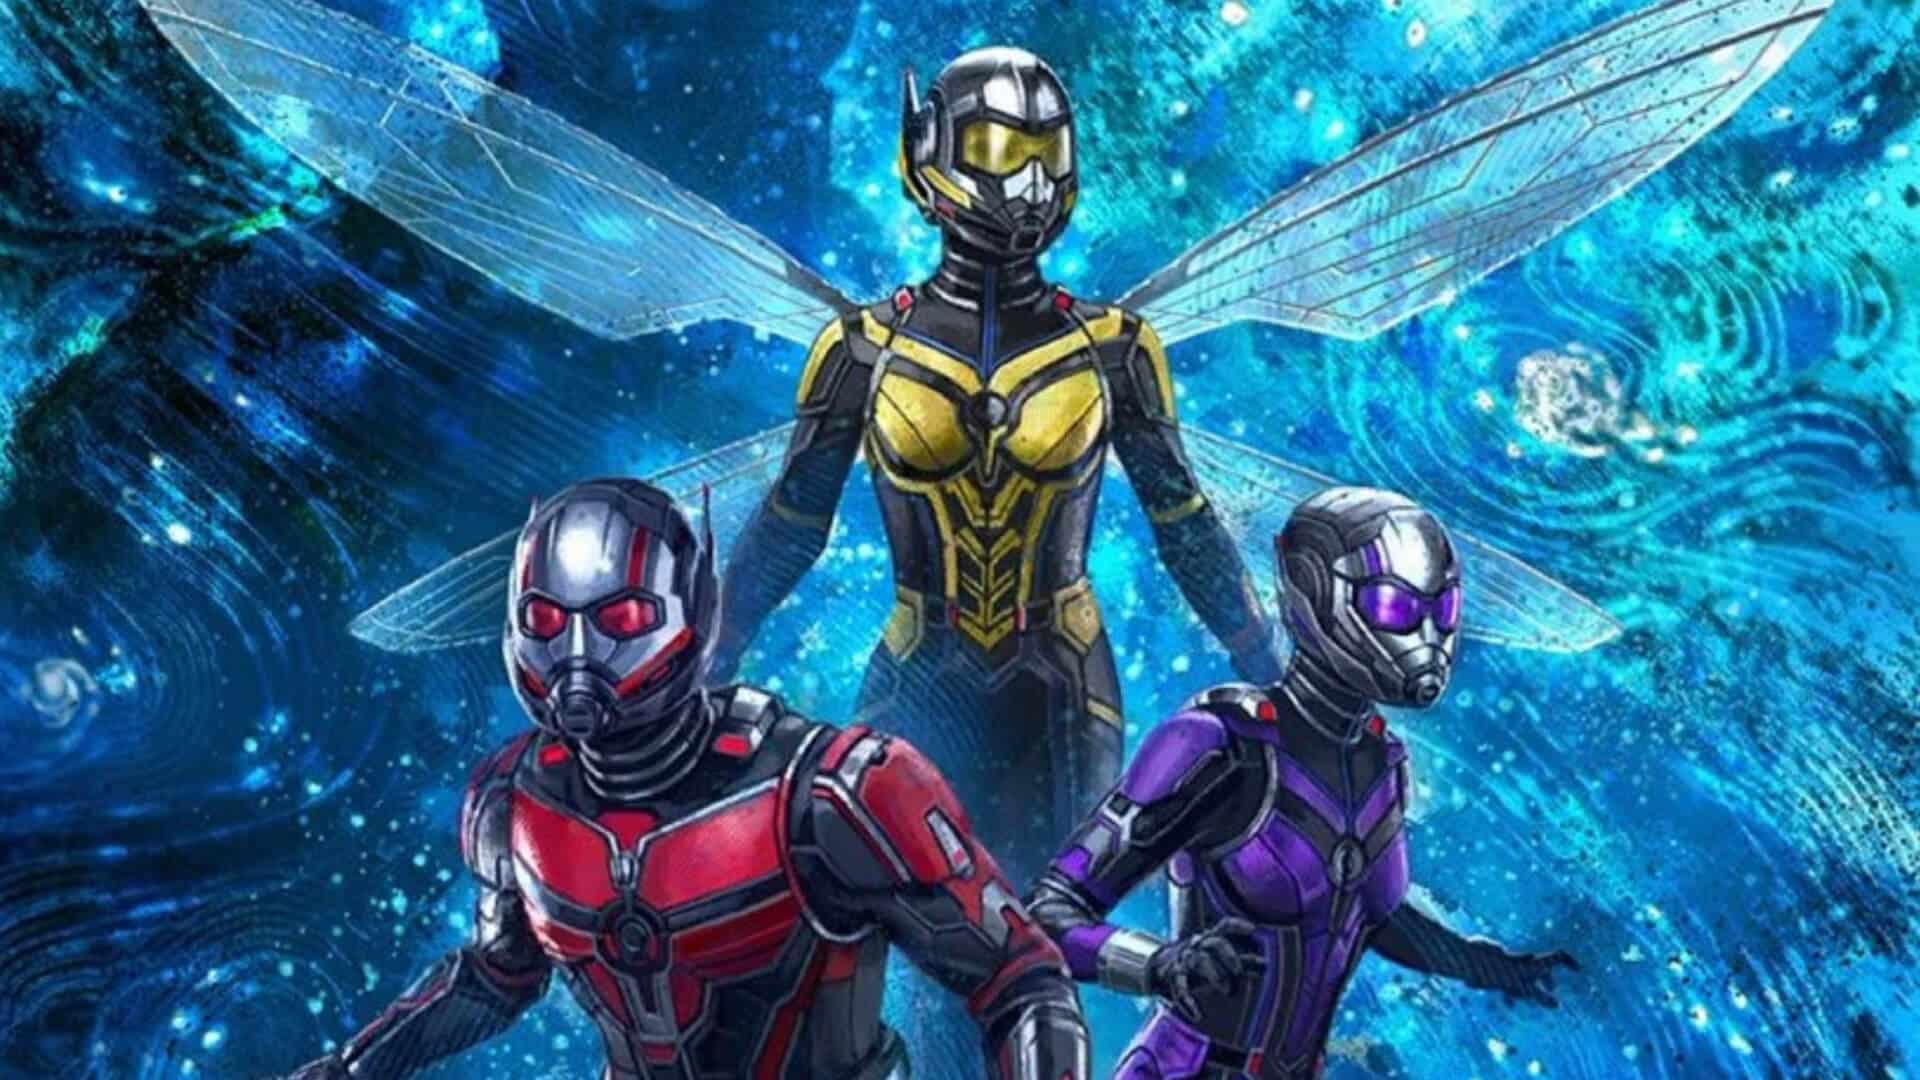 What's New On Disney+  Ant-Man And The Wasp: Quantumania (Canada) – What's  On Disney Plus